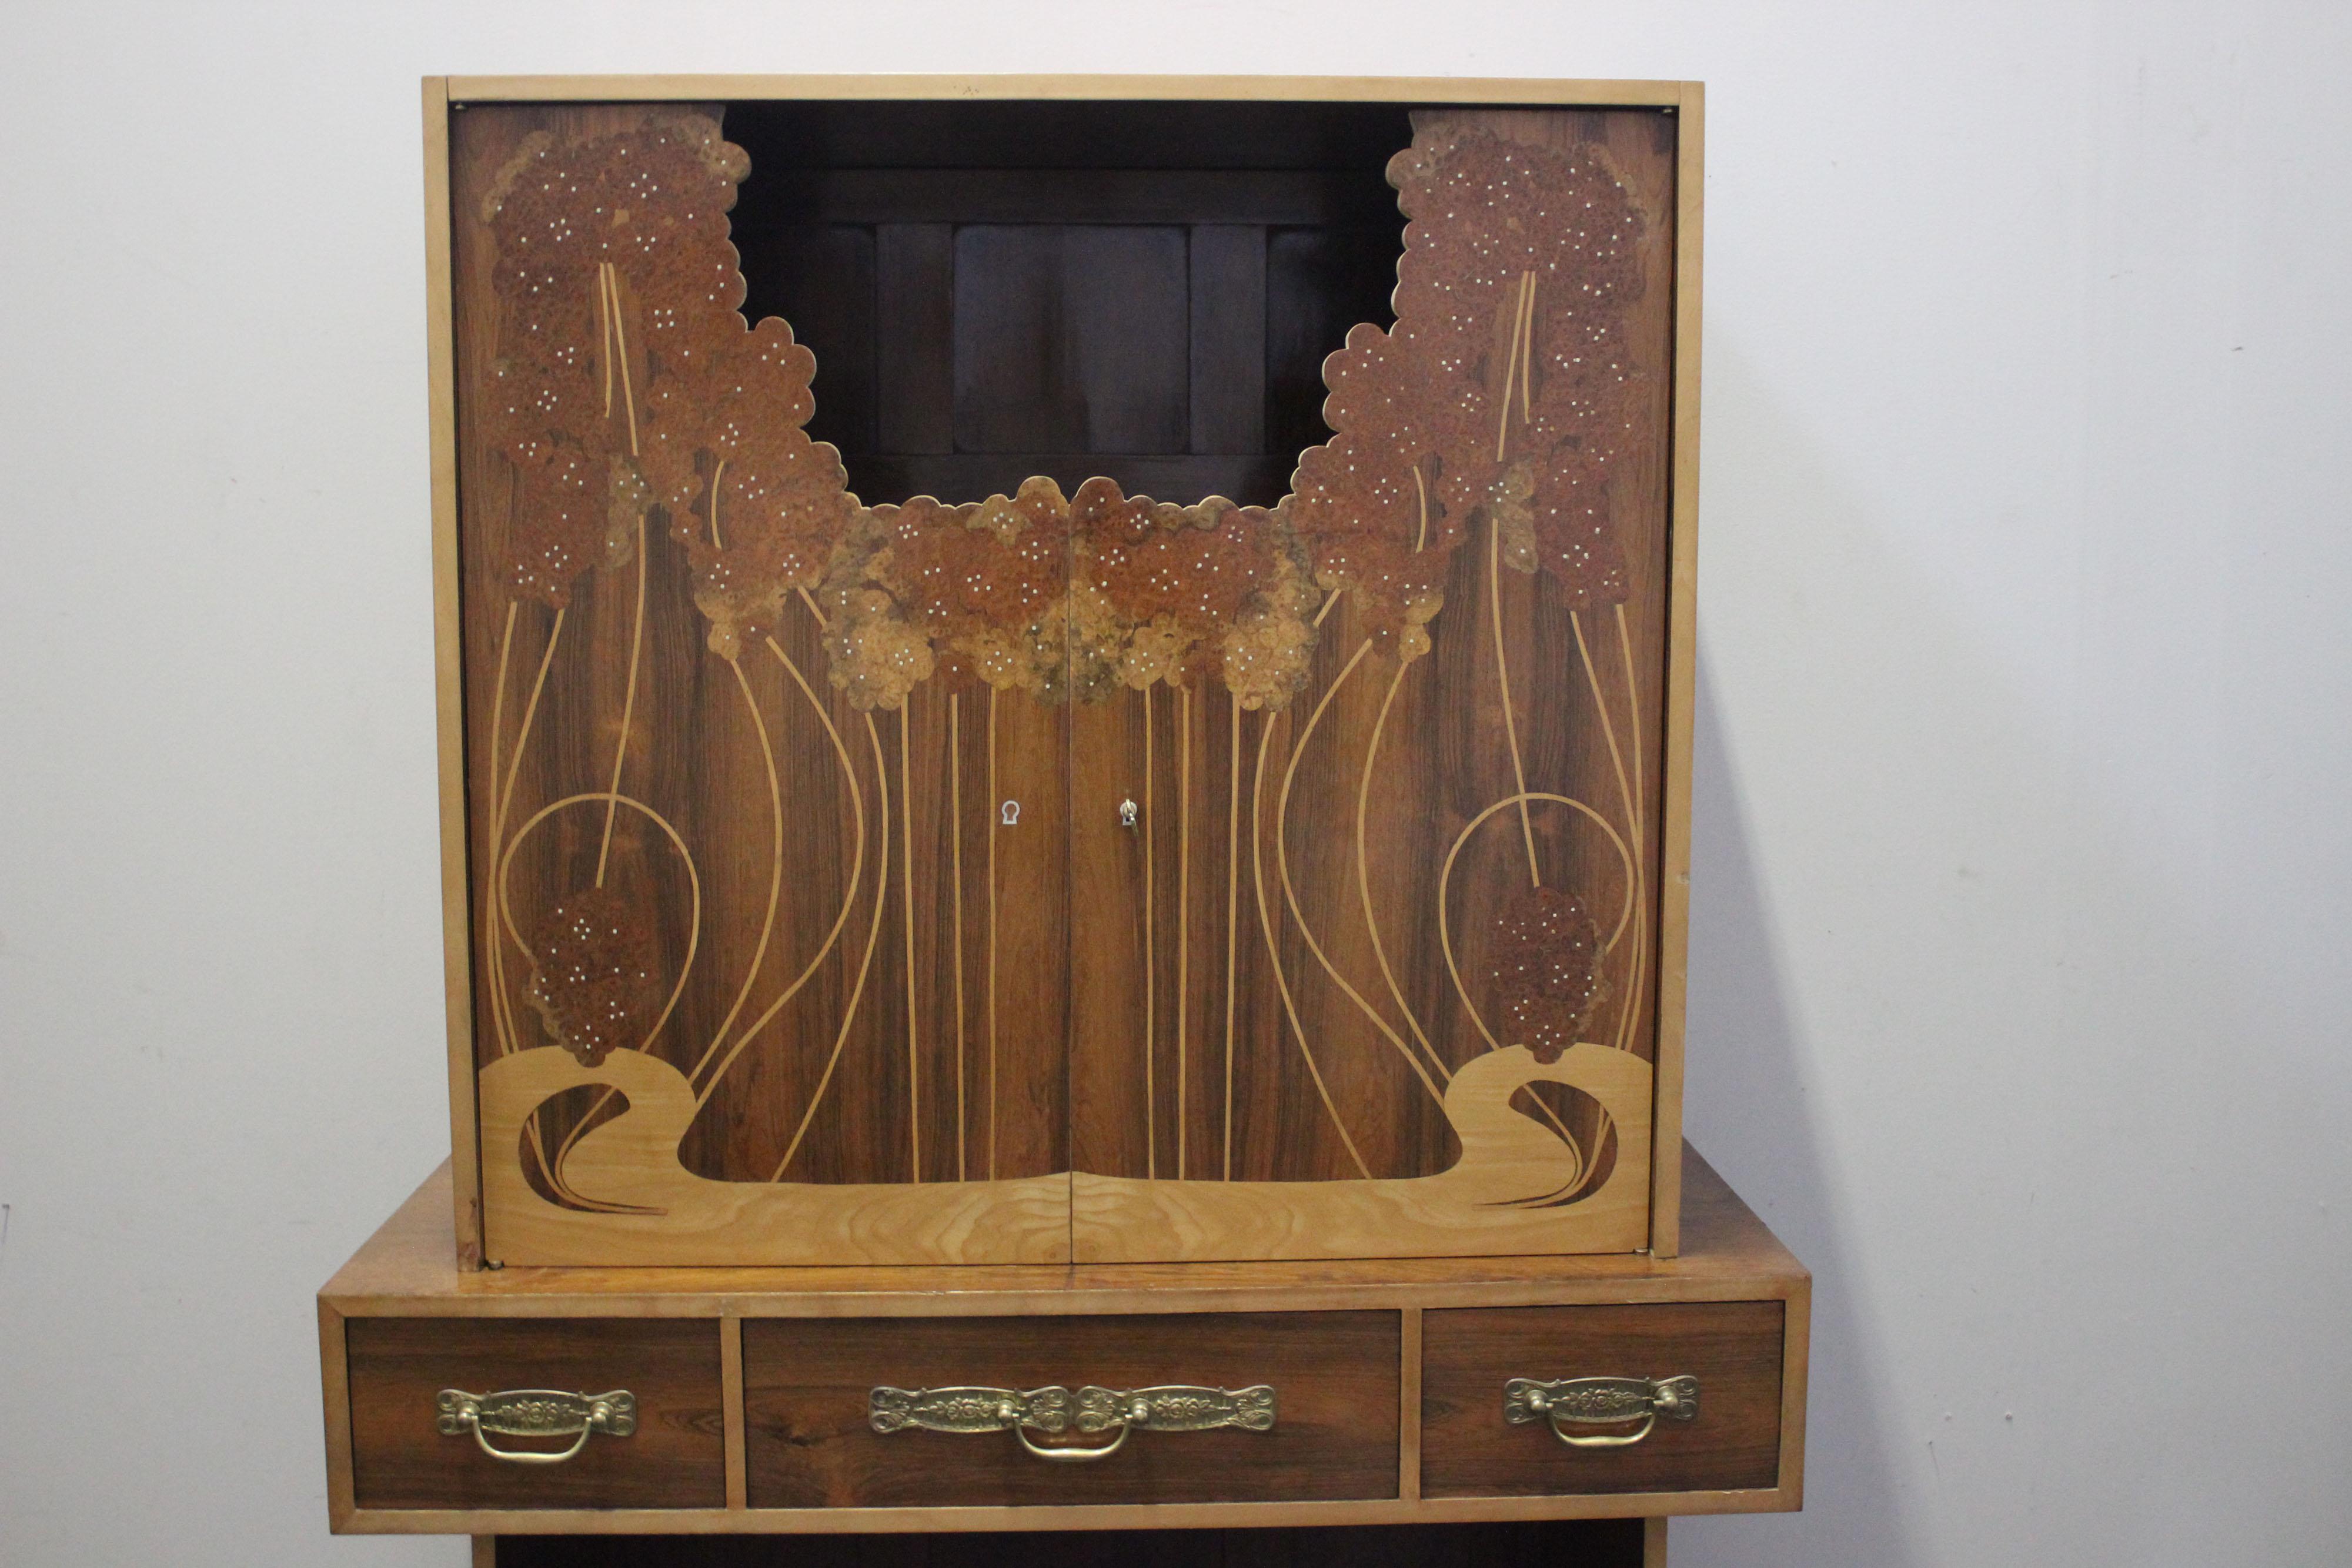 Furniture made of rosewood inlaid with precious briarwood and maple. The furniture is of high bourgeois taste. The contrast of the rigid geometric lines of the body of the furniture that enclose art-nouveau inlays denotes a great cultural level and